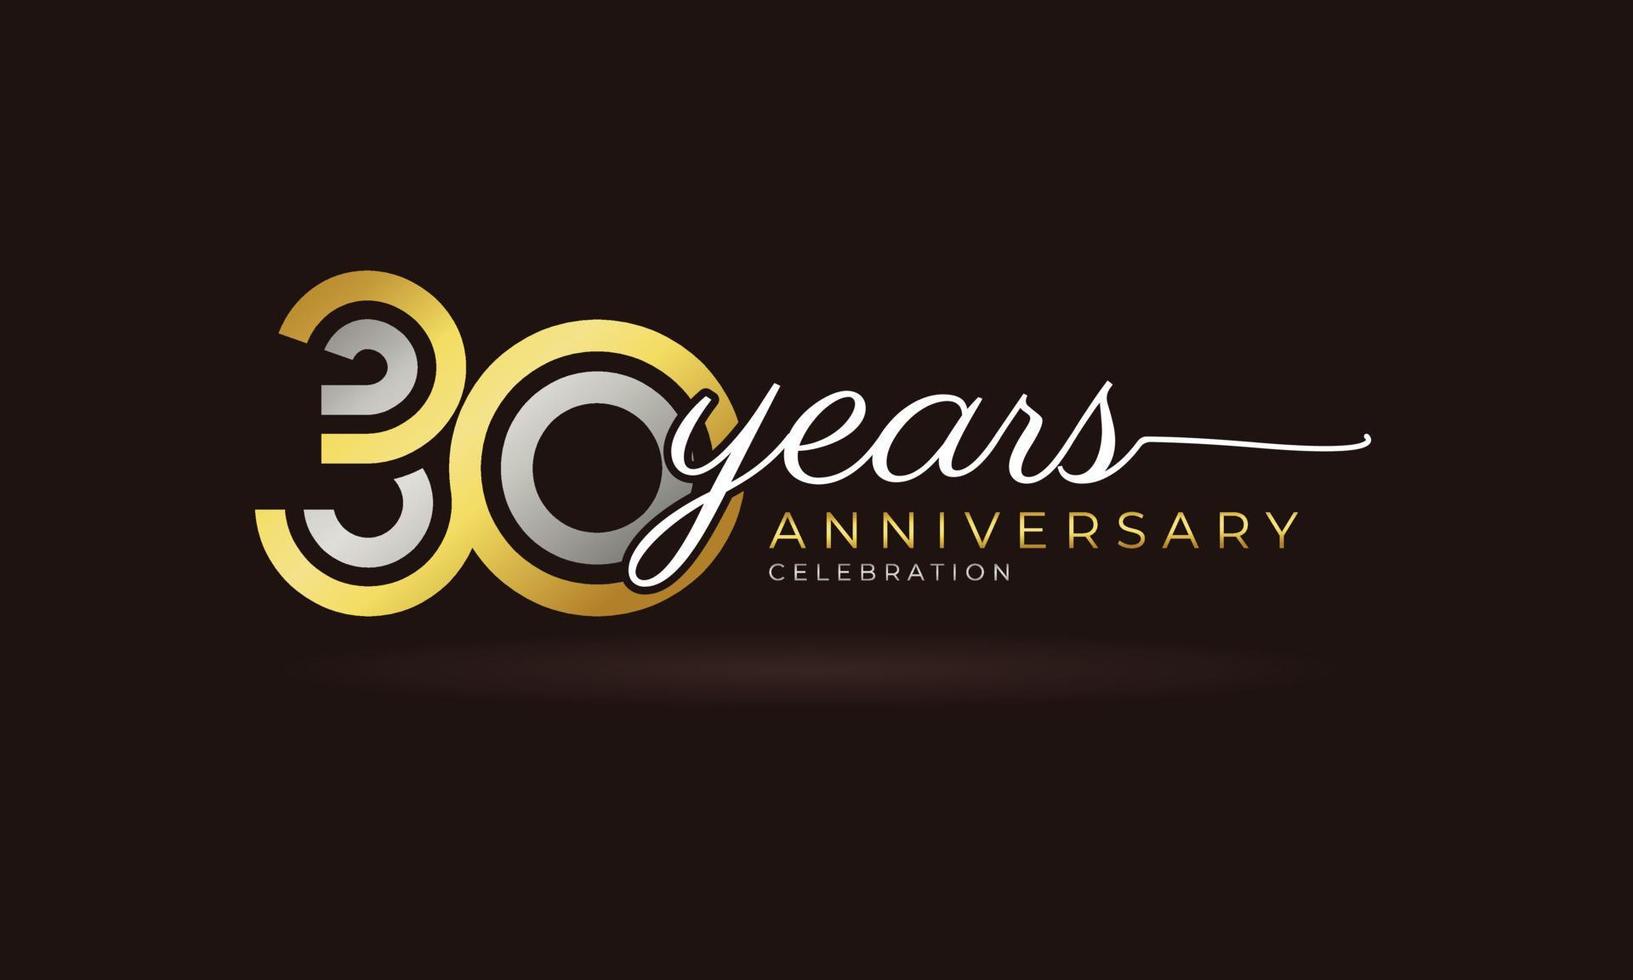 30 Year Anniversary Celebration Logotype with Linked Multiple Line Silver and Golden Color for Celebration Event, Wedding, Greeting Card, and Invitation Isolated on Dark Background vector